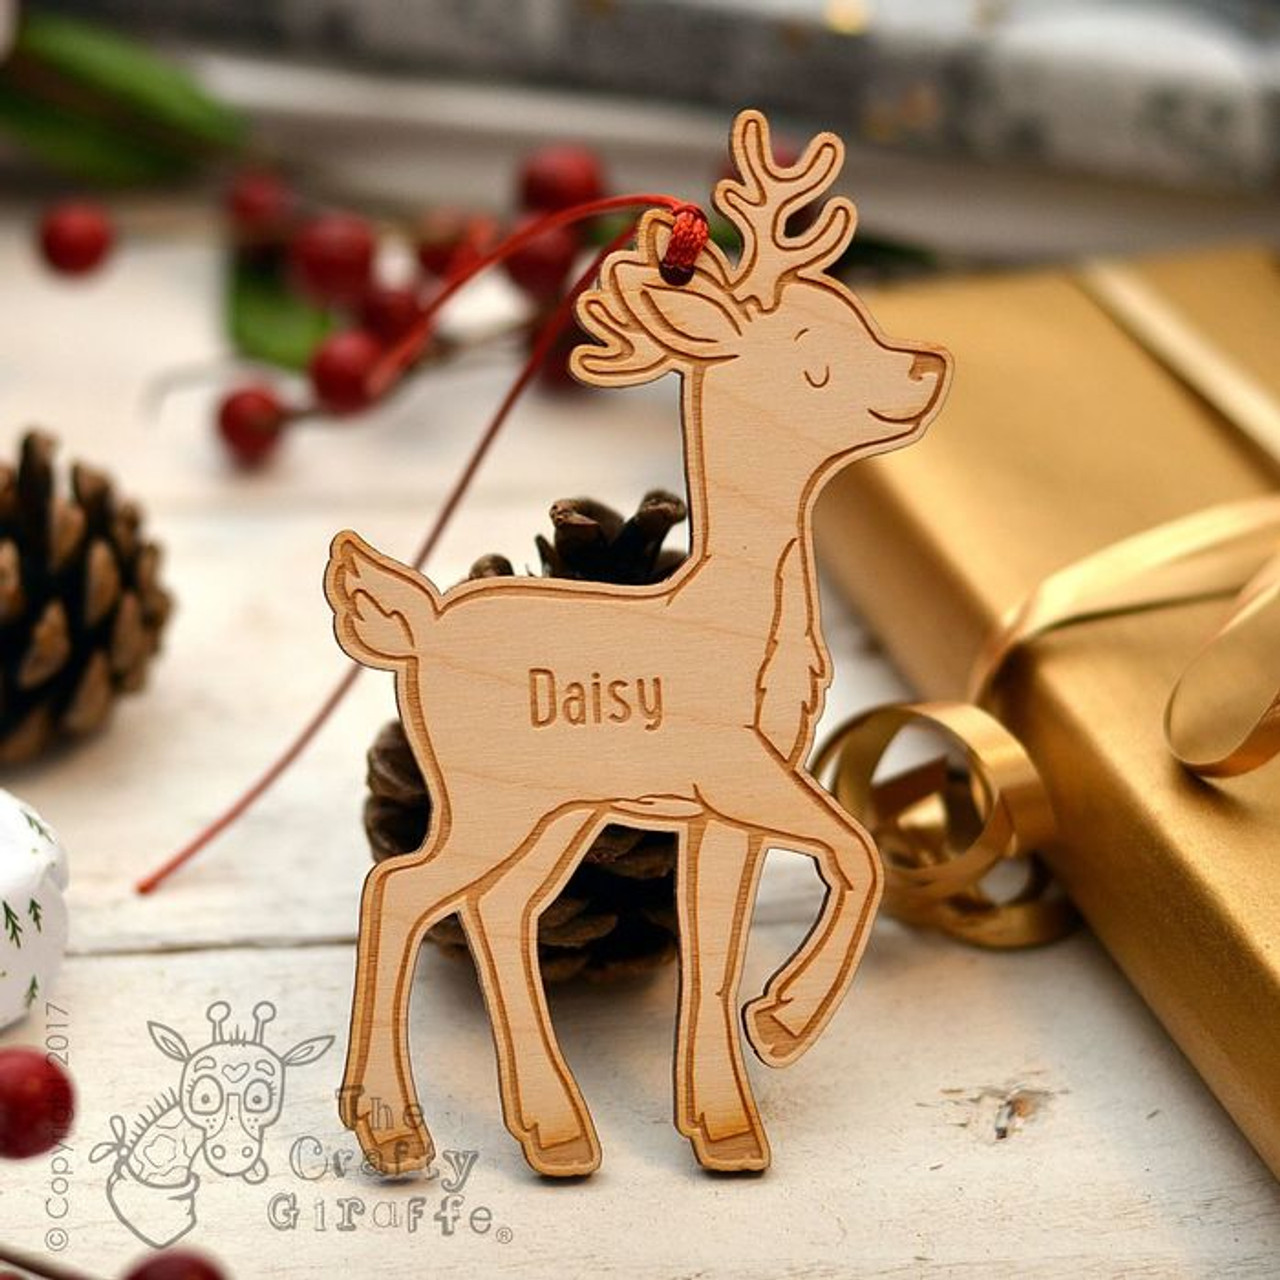 Personalised Wooden Reindeer Decoration - The Crafty Giraffe